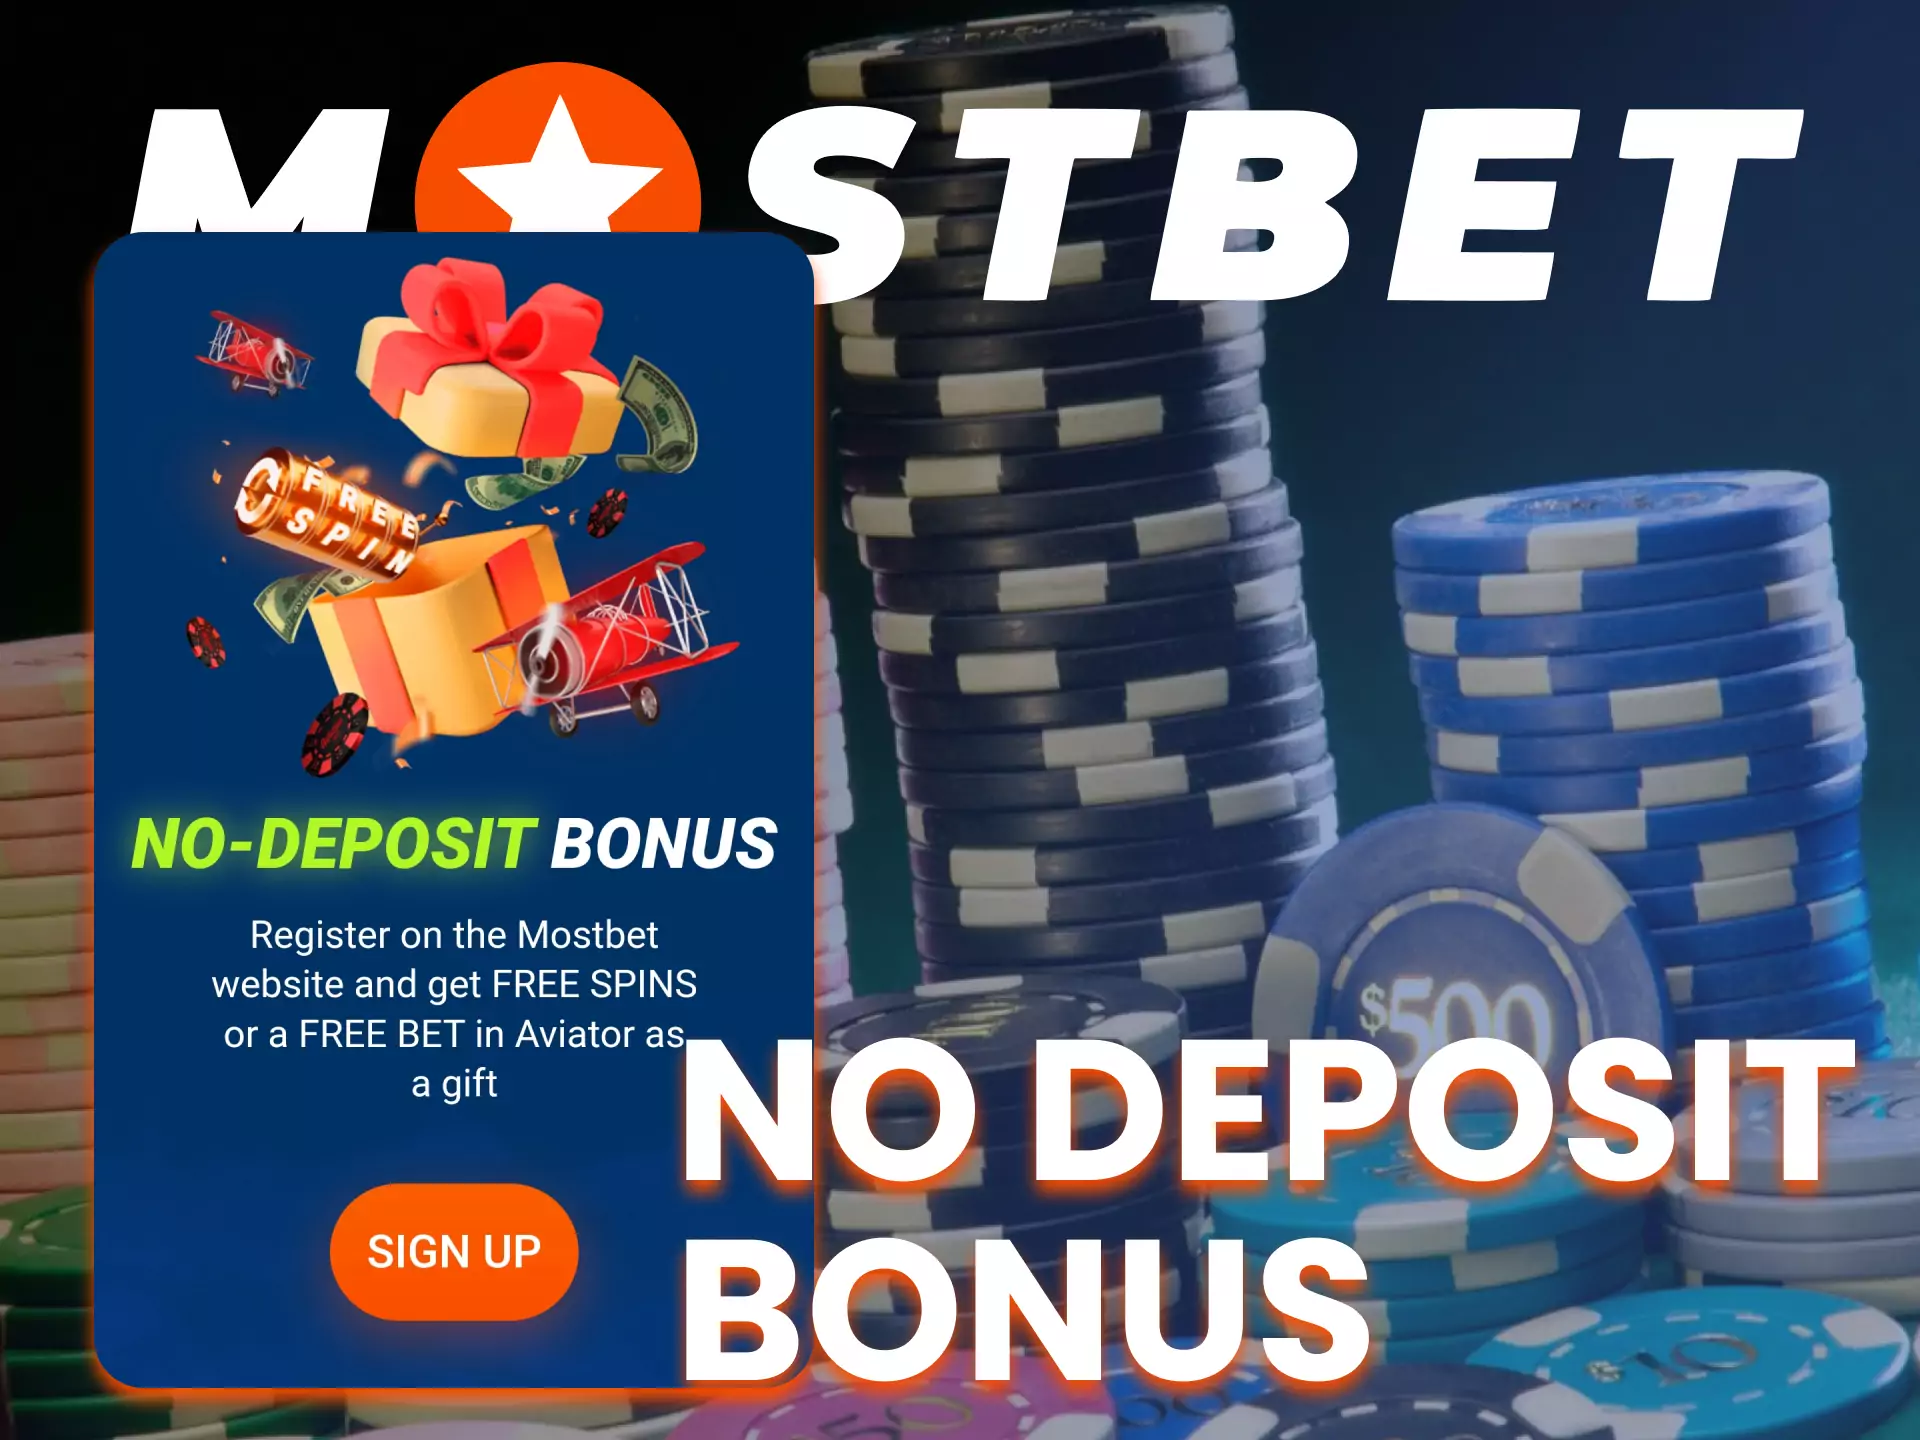 At Mostbet app you will get a special bonus where you don't have to make a deposit.